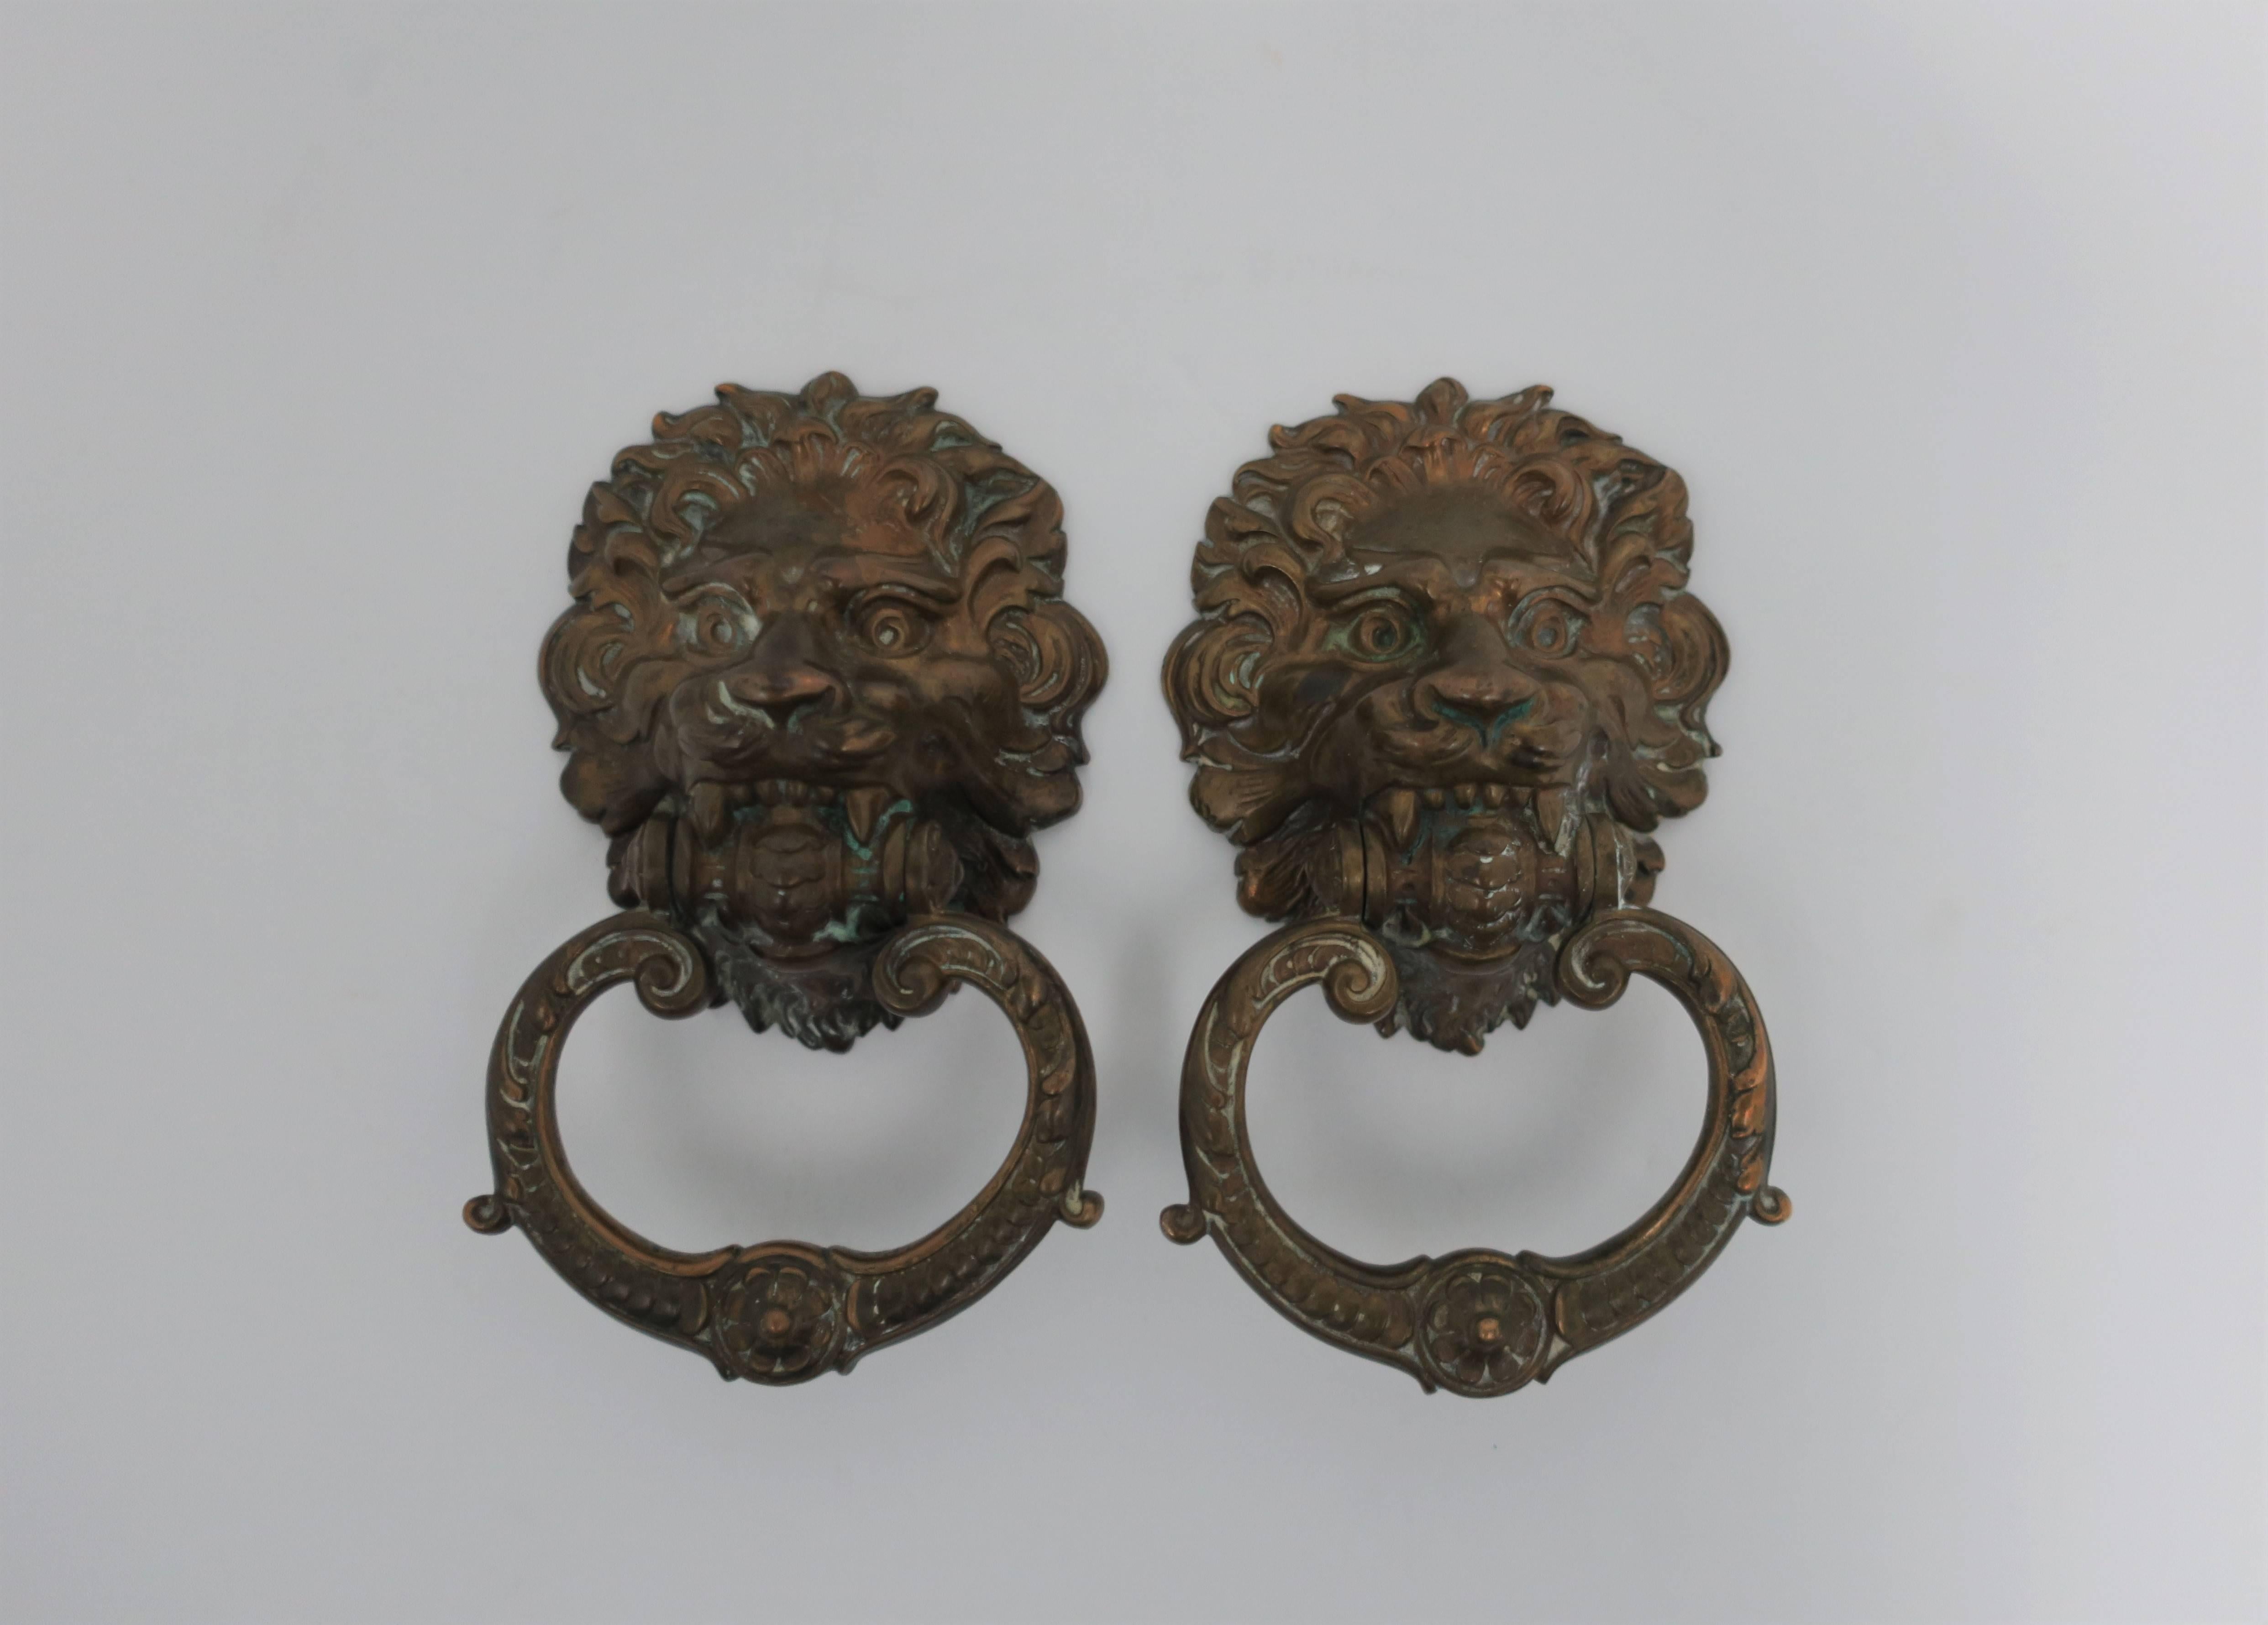 A beautiful, substantial, and detailed pair of vintage bronze neoclassical style lion head hardware door knockers. Detailed bronze: face, hair, eyes, nose, jaw and knocker ring. 

Each measure: 6.5 in. H x 3.5 in. W x 2 in. D. 

Pair available here